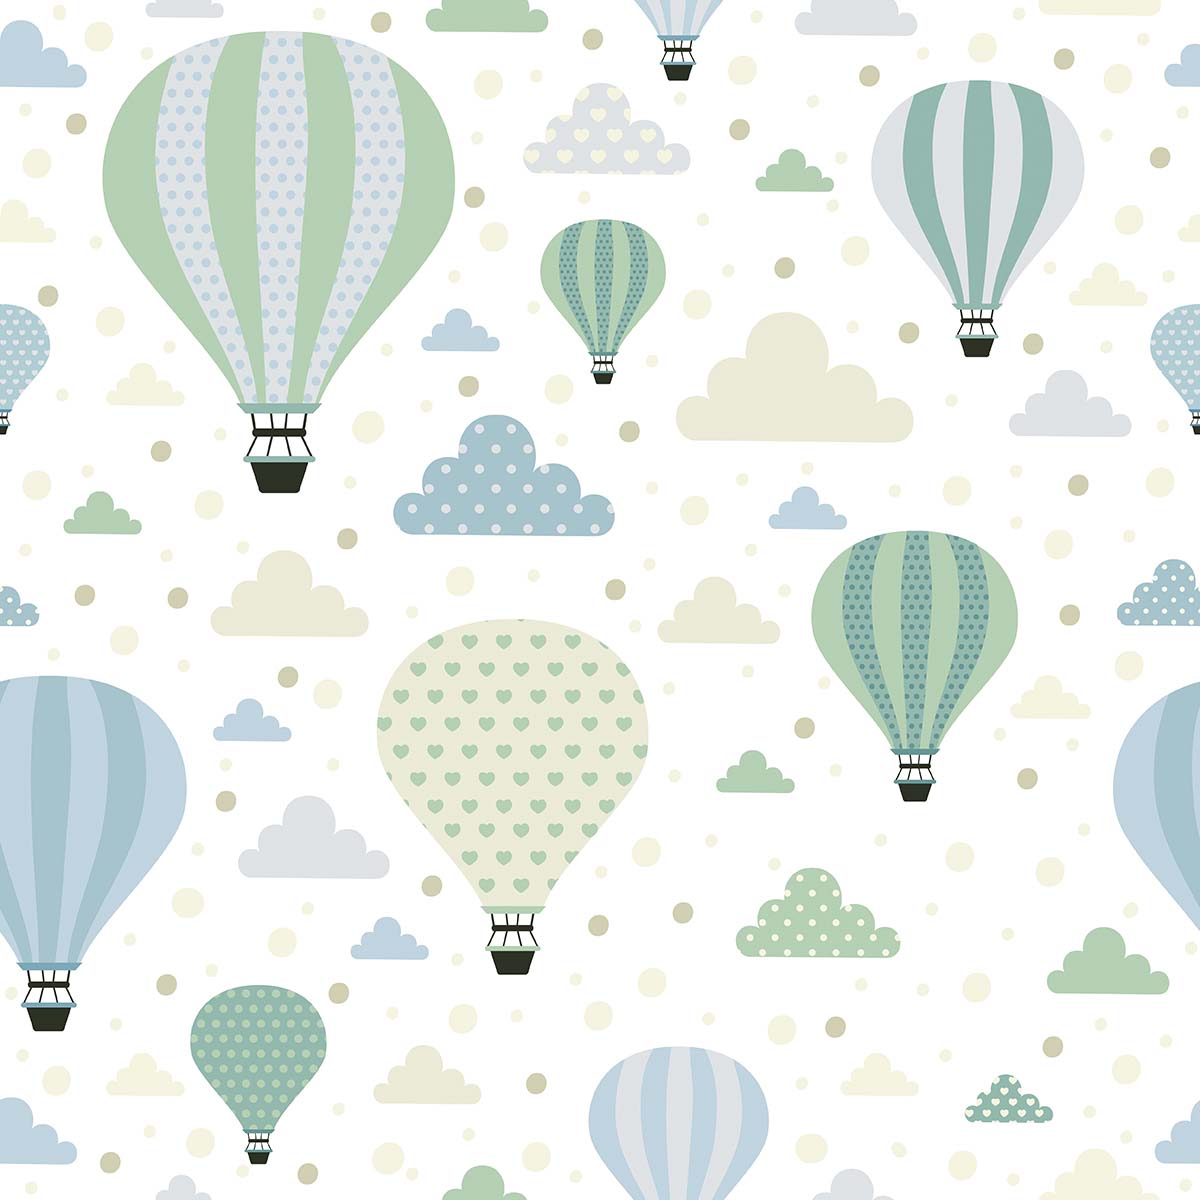 A pattern of hot air balloons and clouds